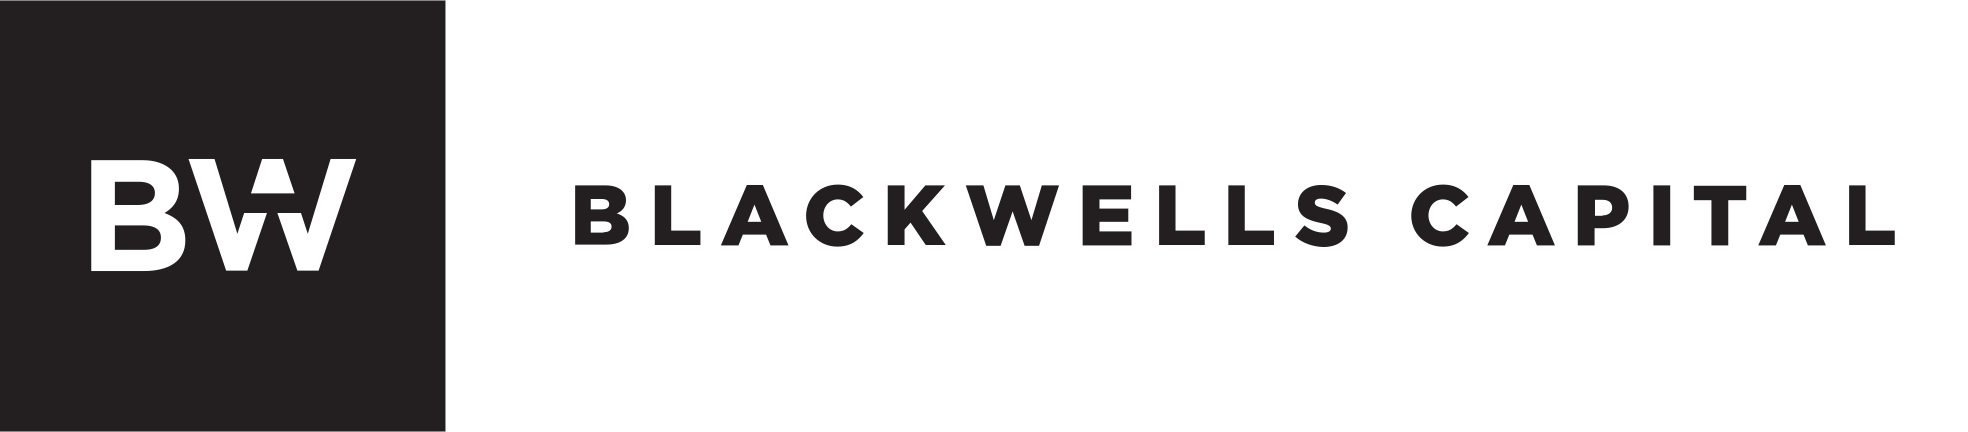 Blackwells Capital Releases its Vision for the Future of